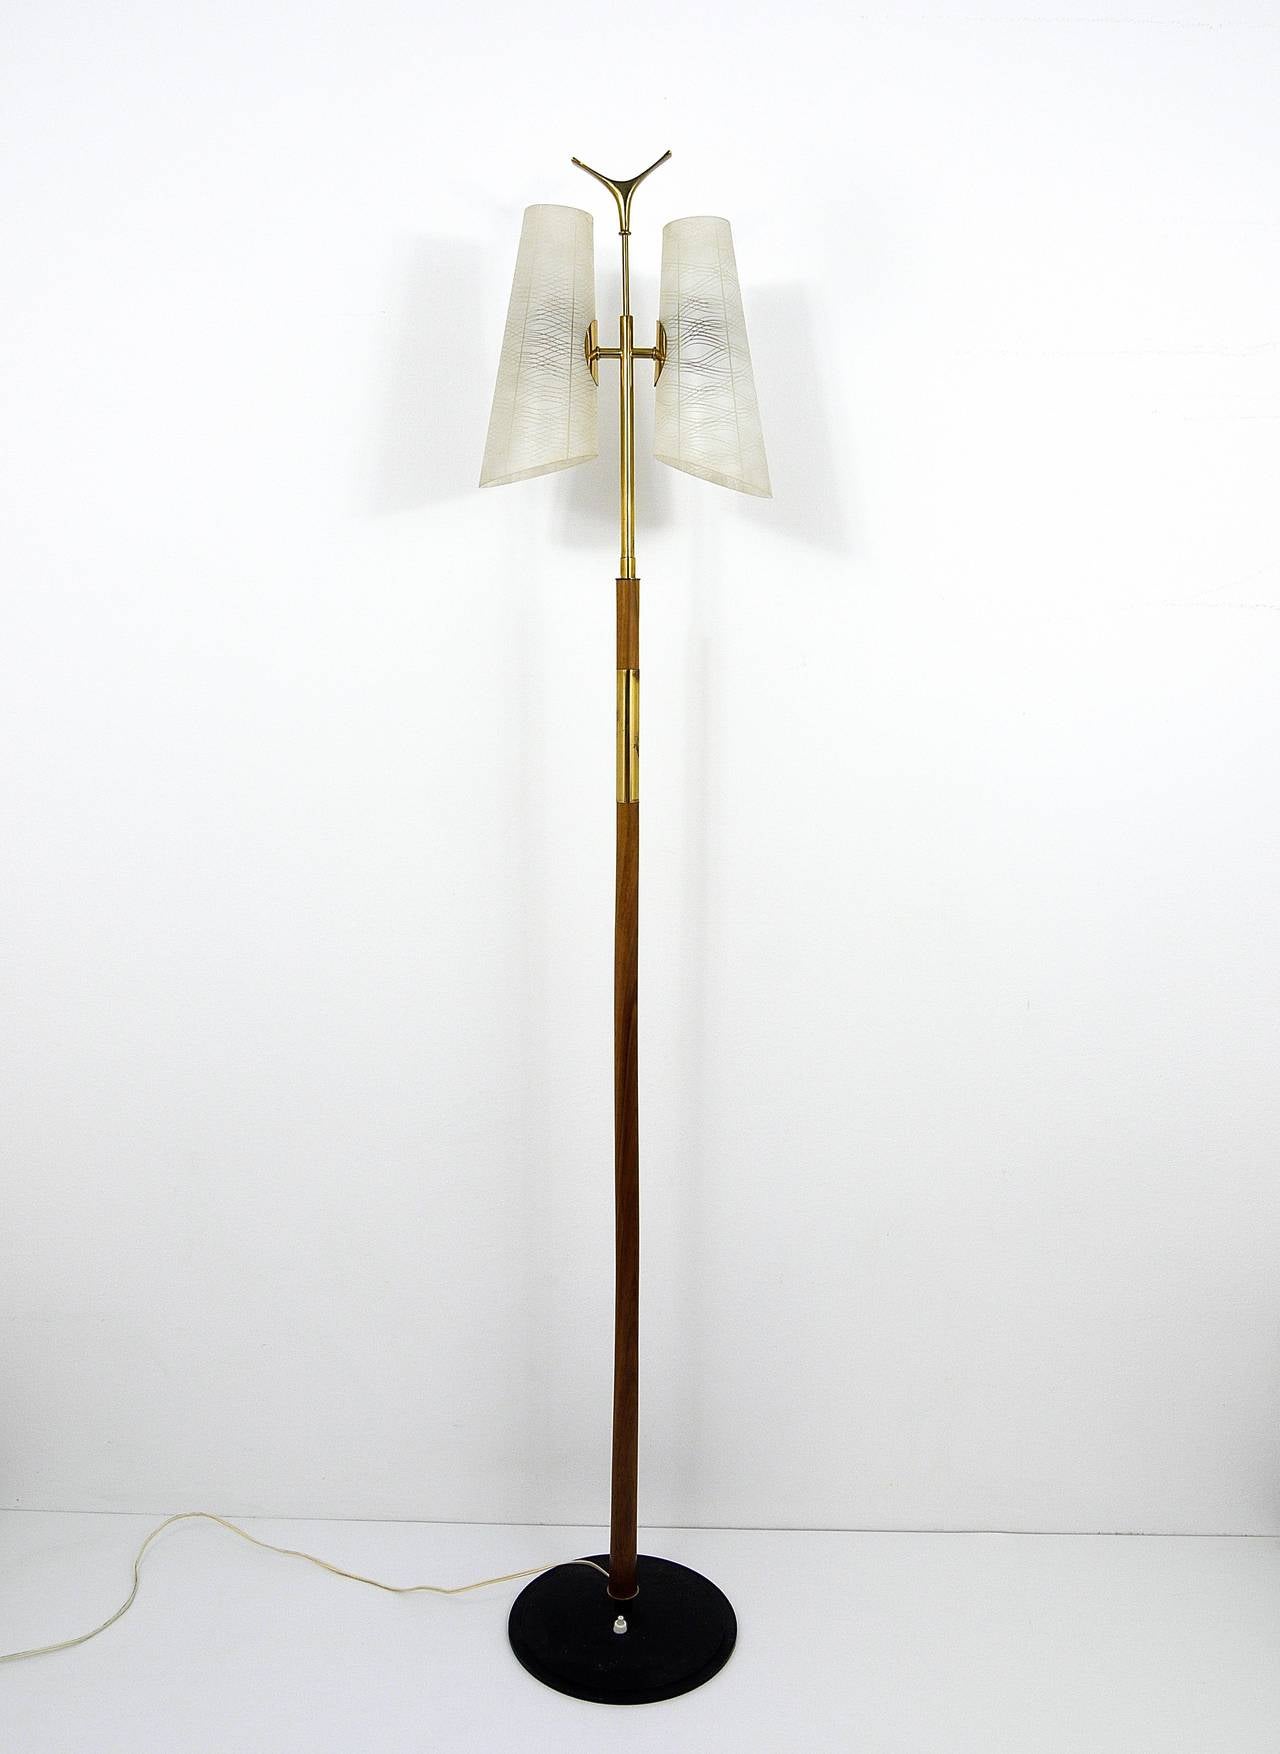 A beautiful Viennese modernist floor lamp, designed and executed by Rubert Nikoll in the 1950s. Has a black cast-iron base, a wooden stem, lovely brass details, nice striped glass lampshades and a charming solid brass top. In excellent condition,